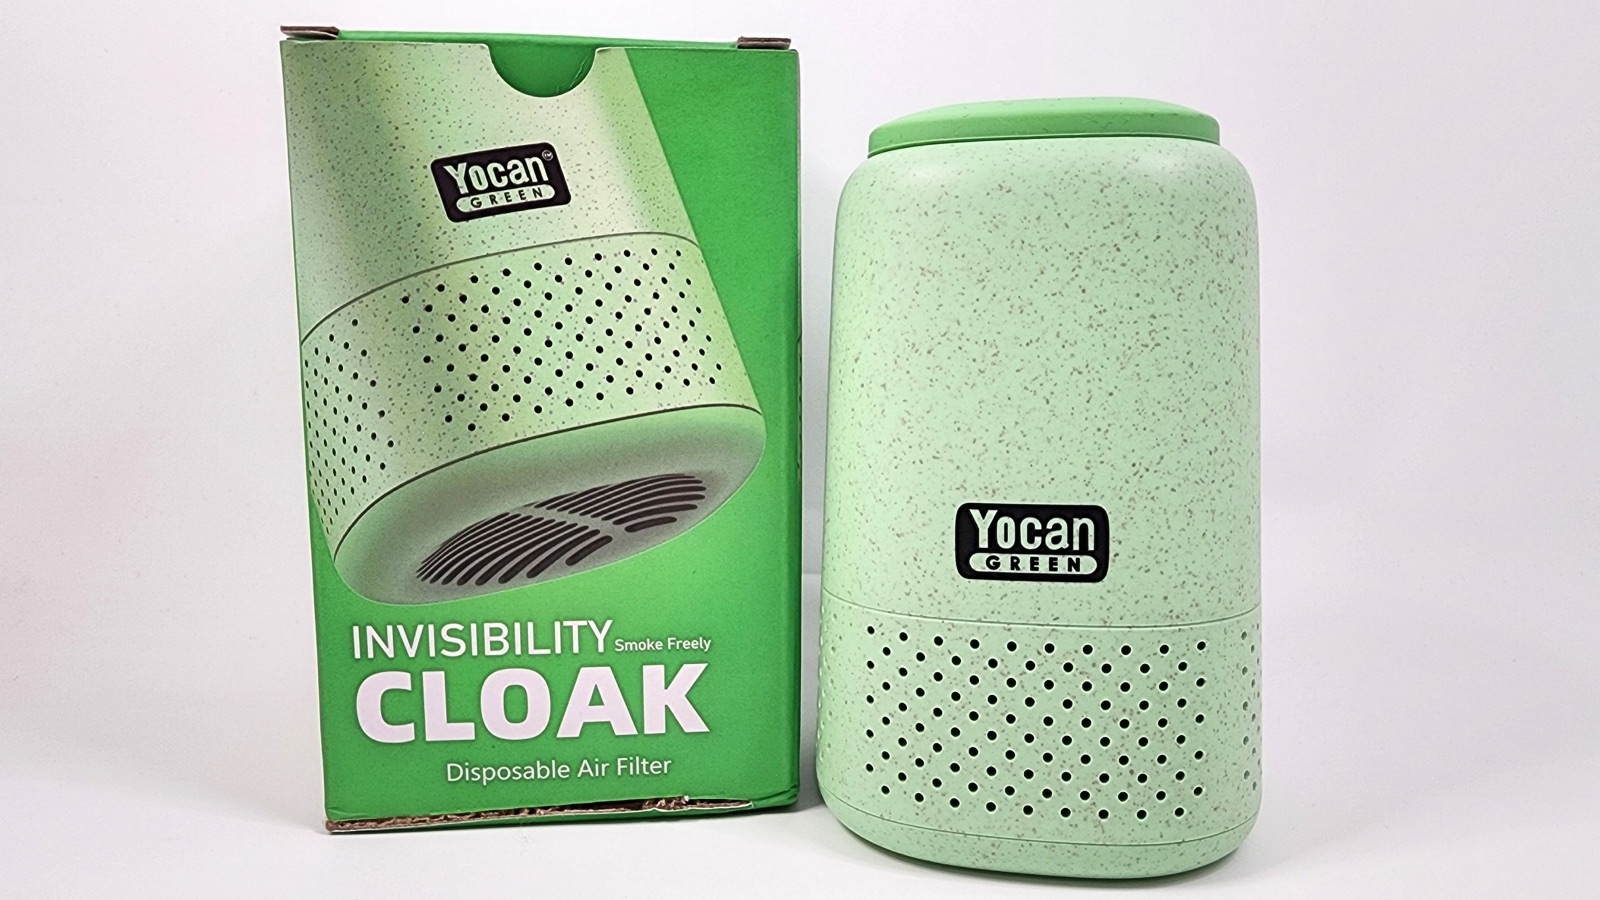 Yocan Invisibility Cloak air filter device placed next to its packaging box